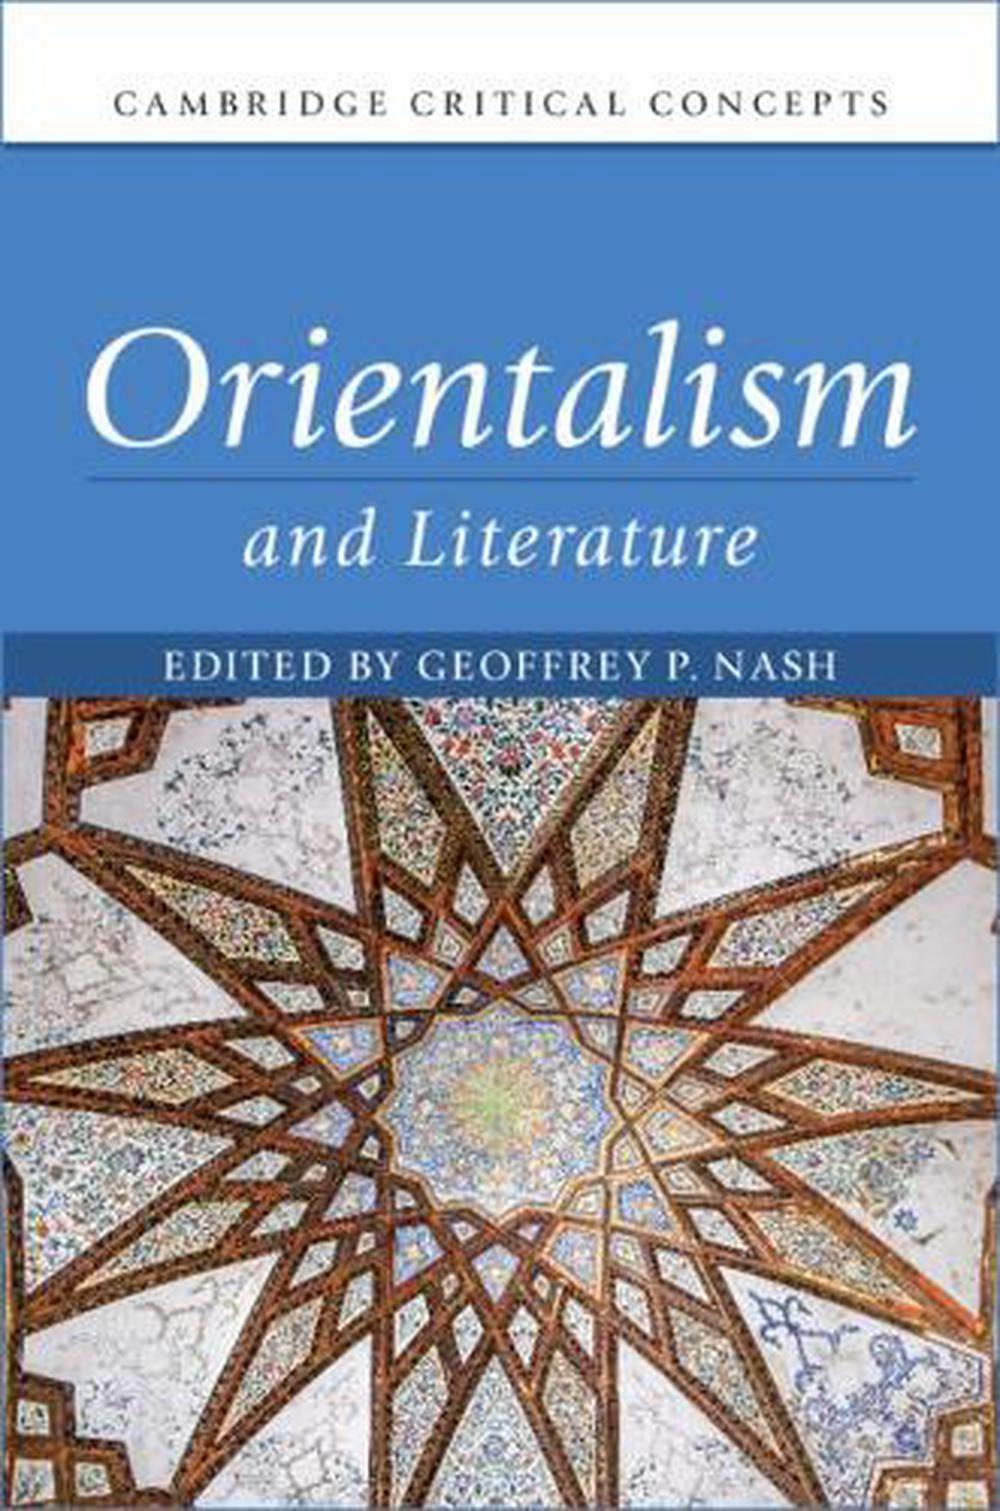 Orientalism and Literature (English) Hardcover Book Free Shipping! 9781108499002 eBay